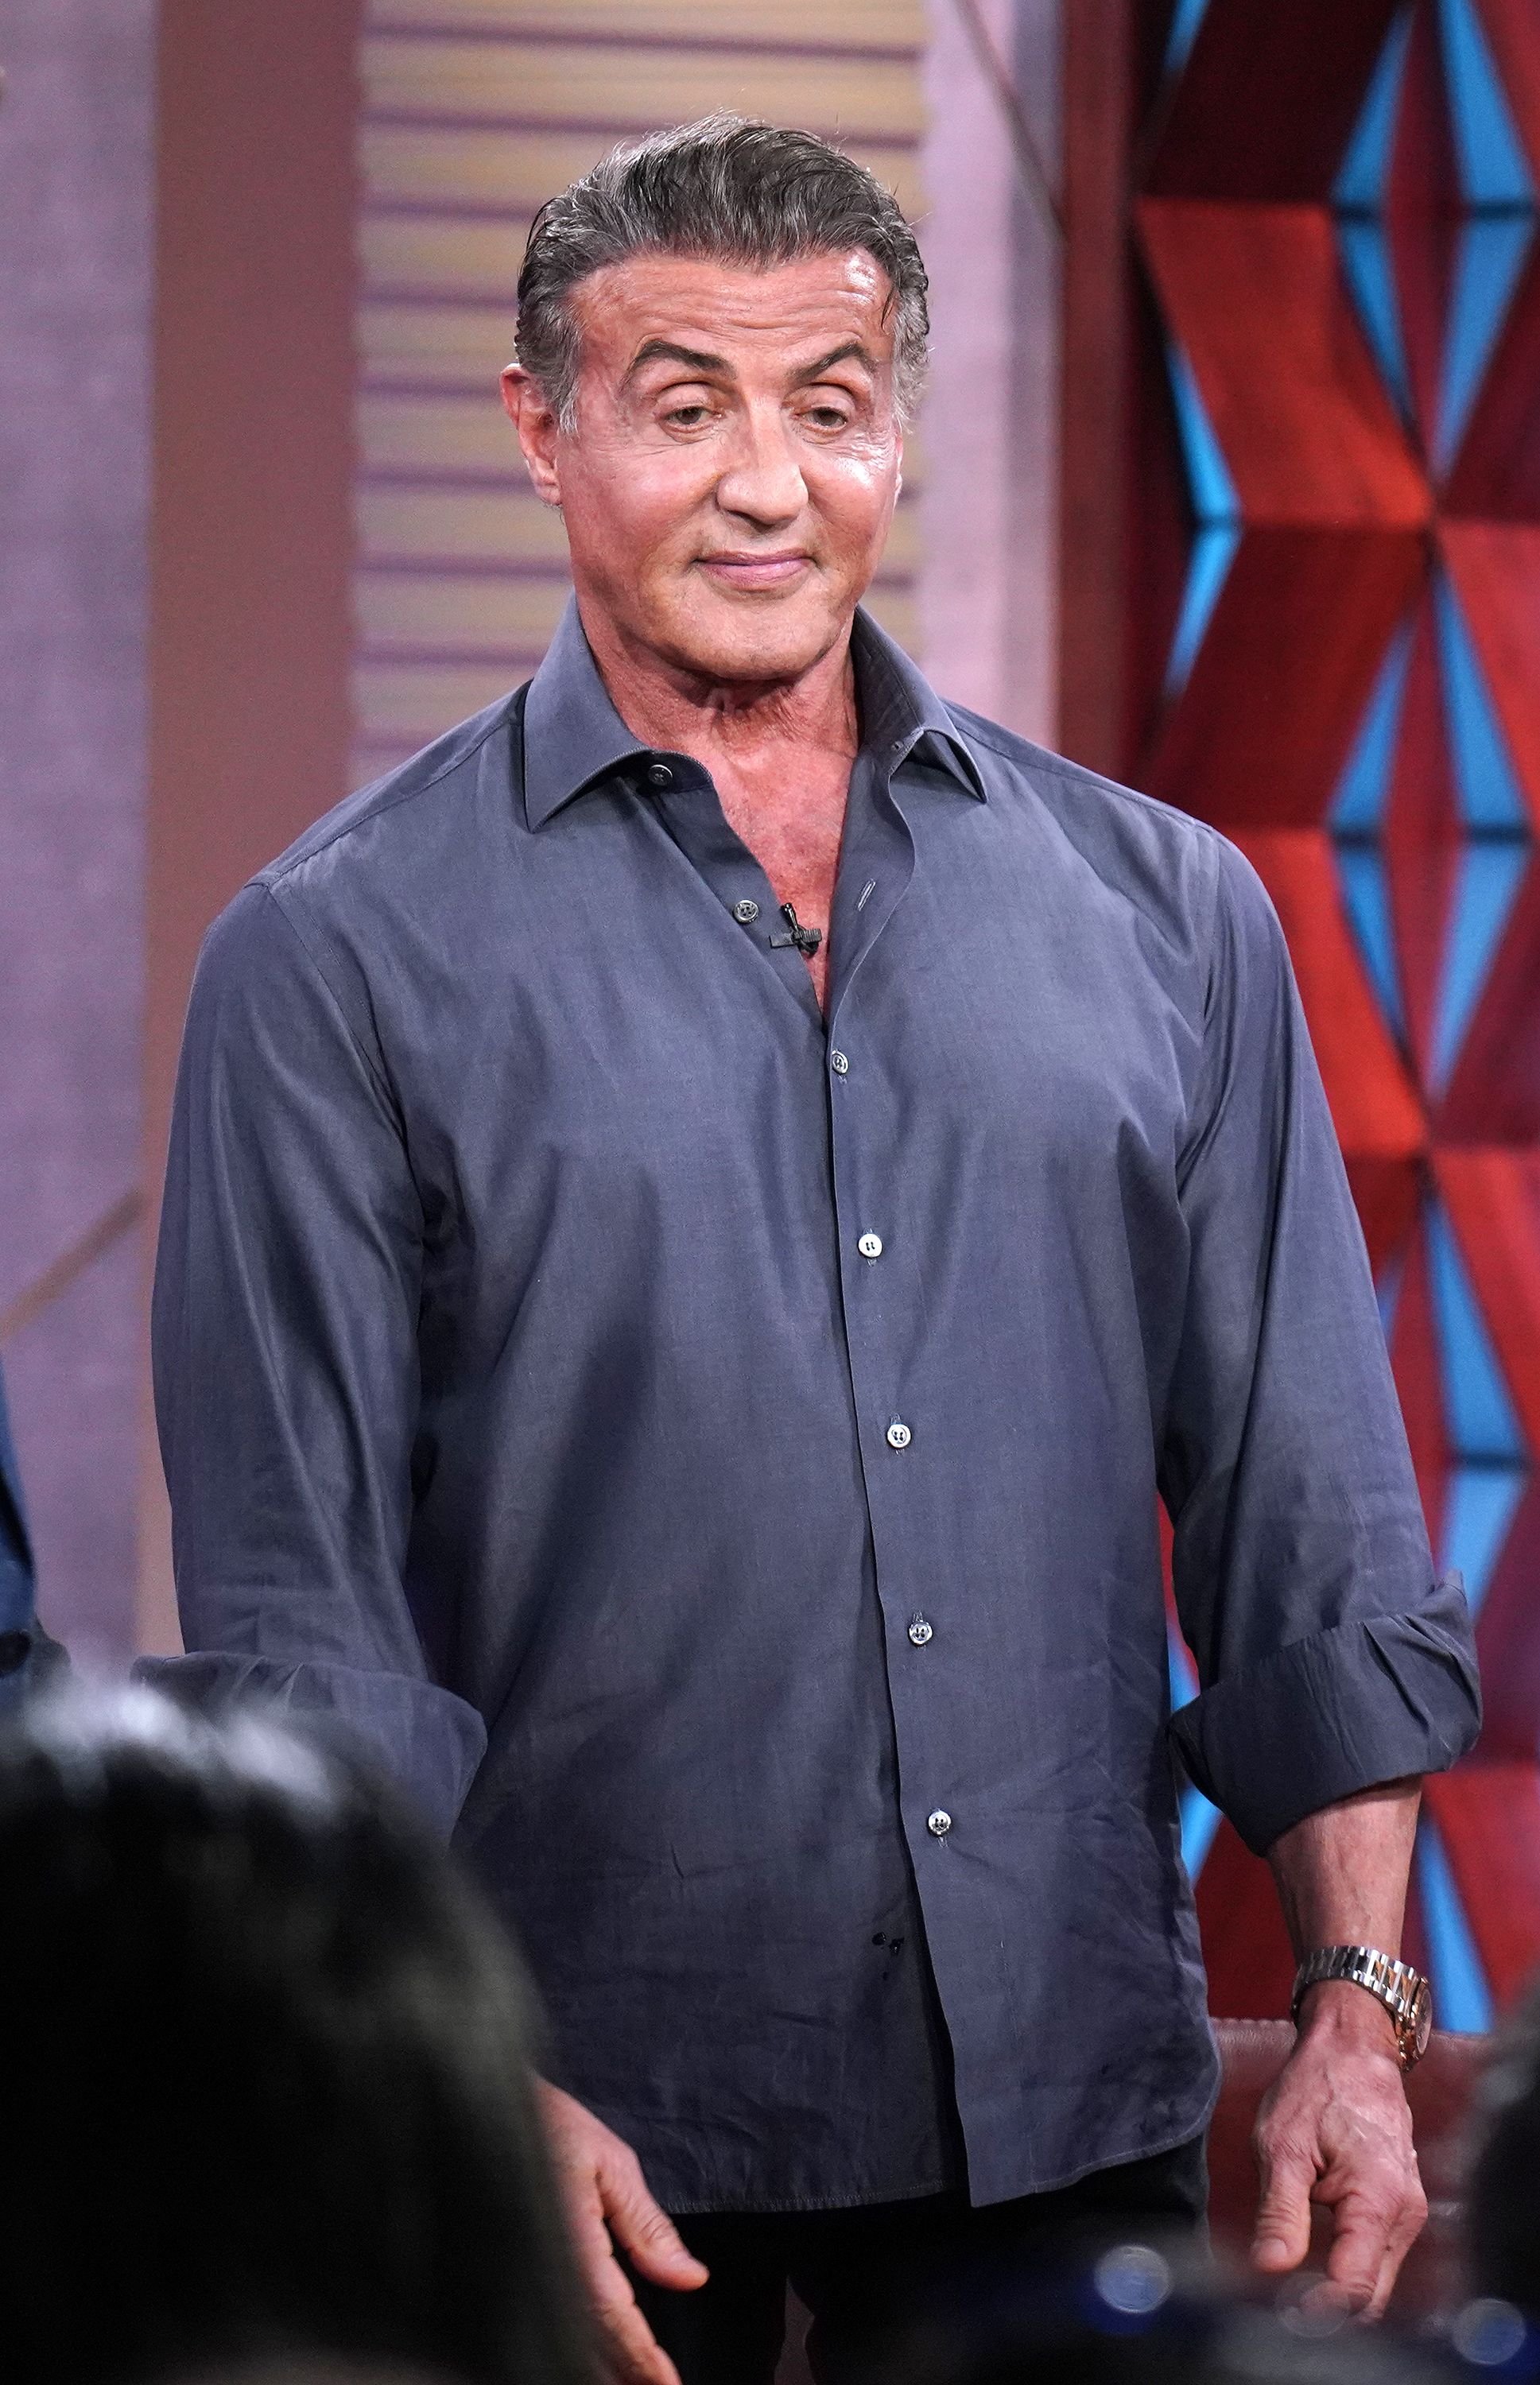 Sylvester Stallone on the set of "Un Nuevo Dia" at Telemundo Center to promote the film "Rambo: Last Blood" on September 17, 2019. | Getty Images